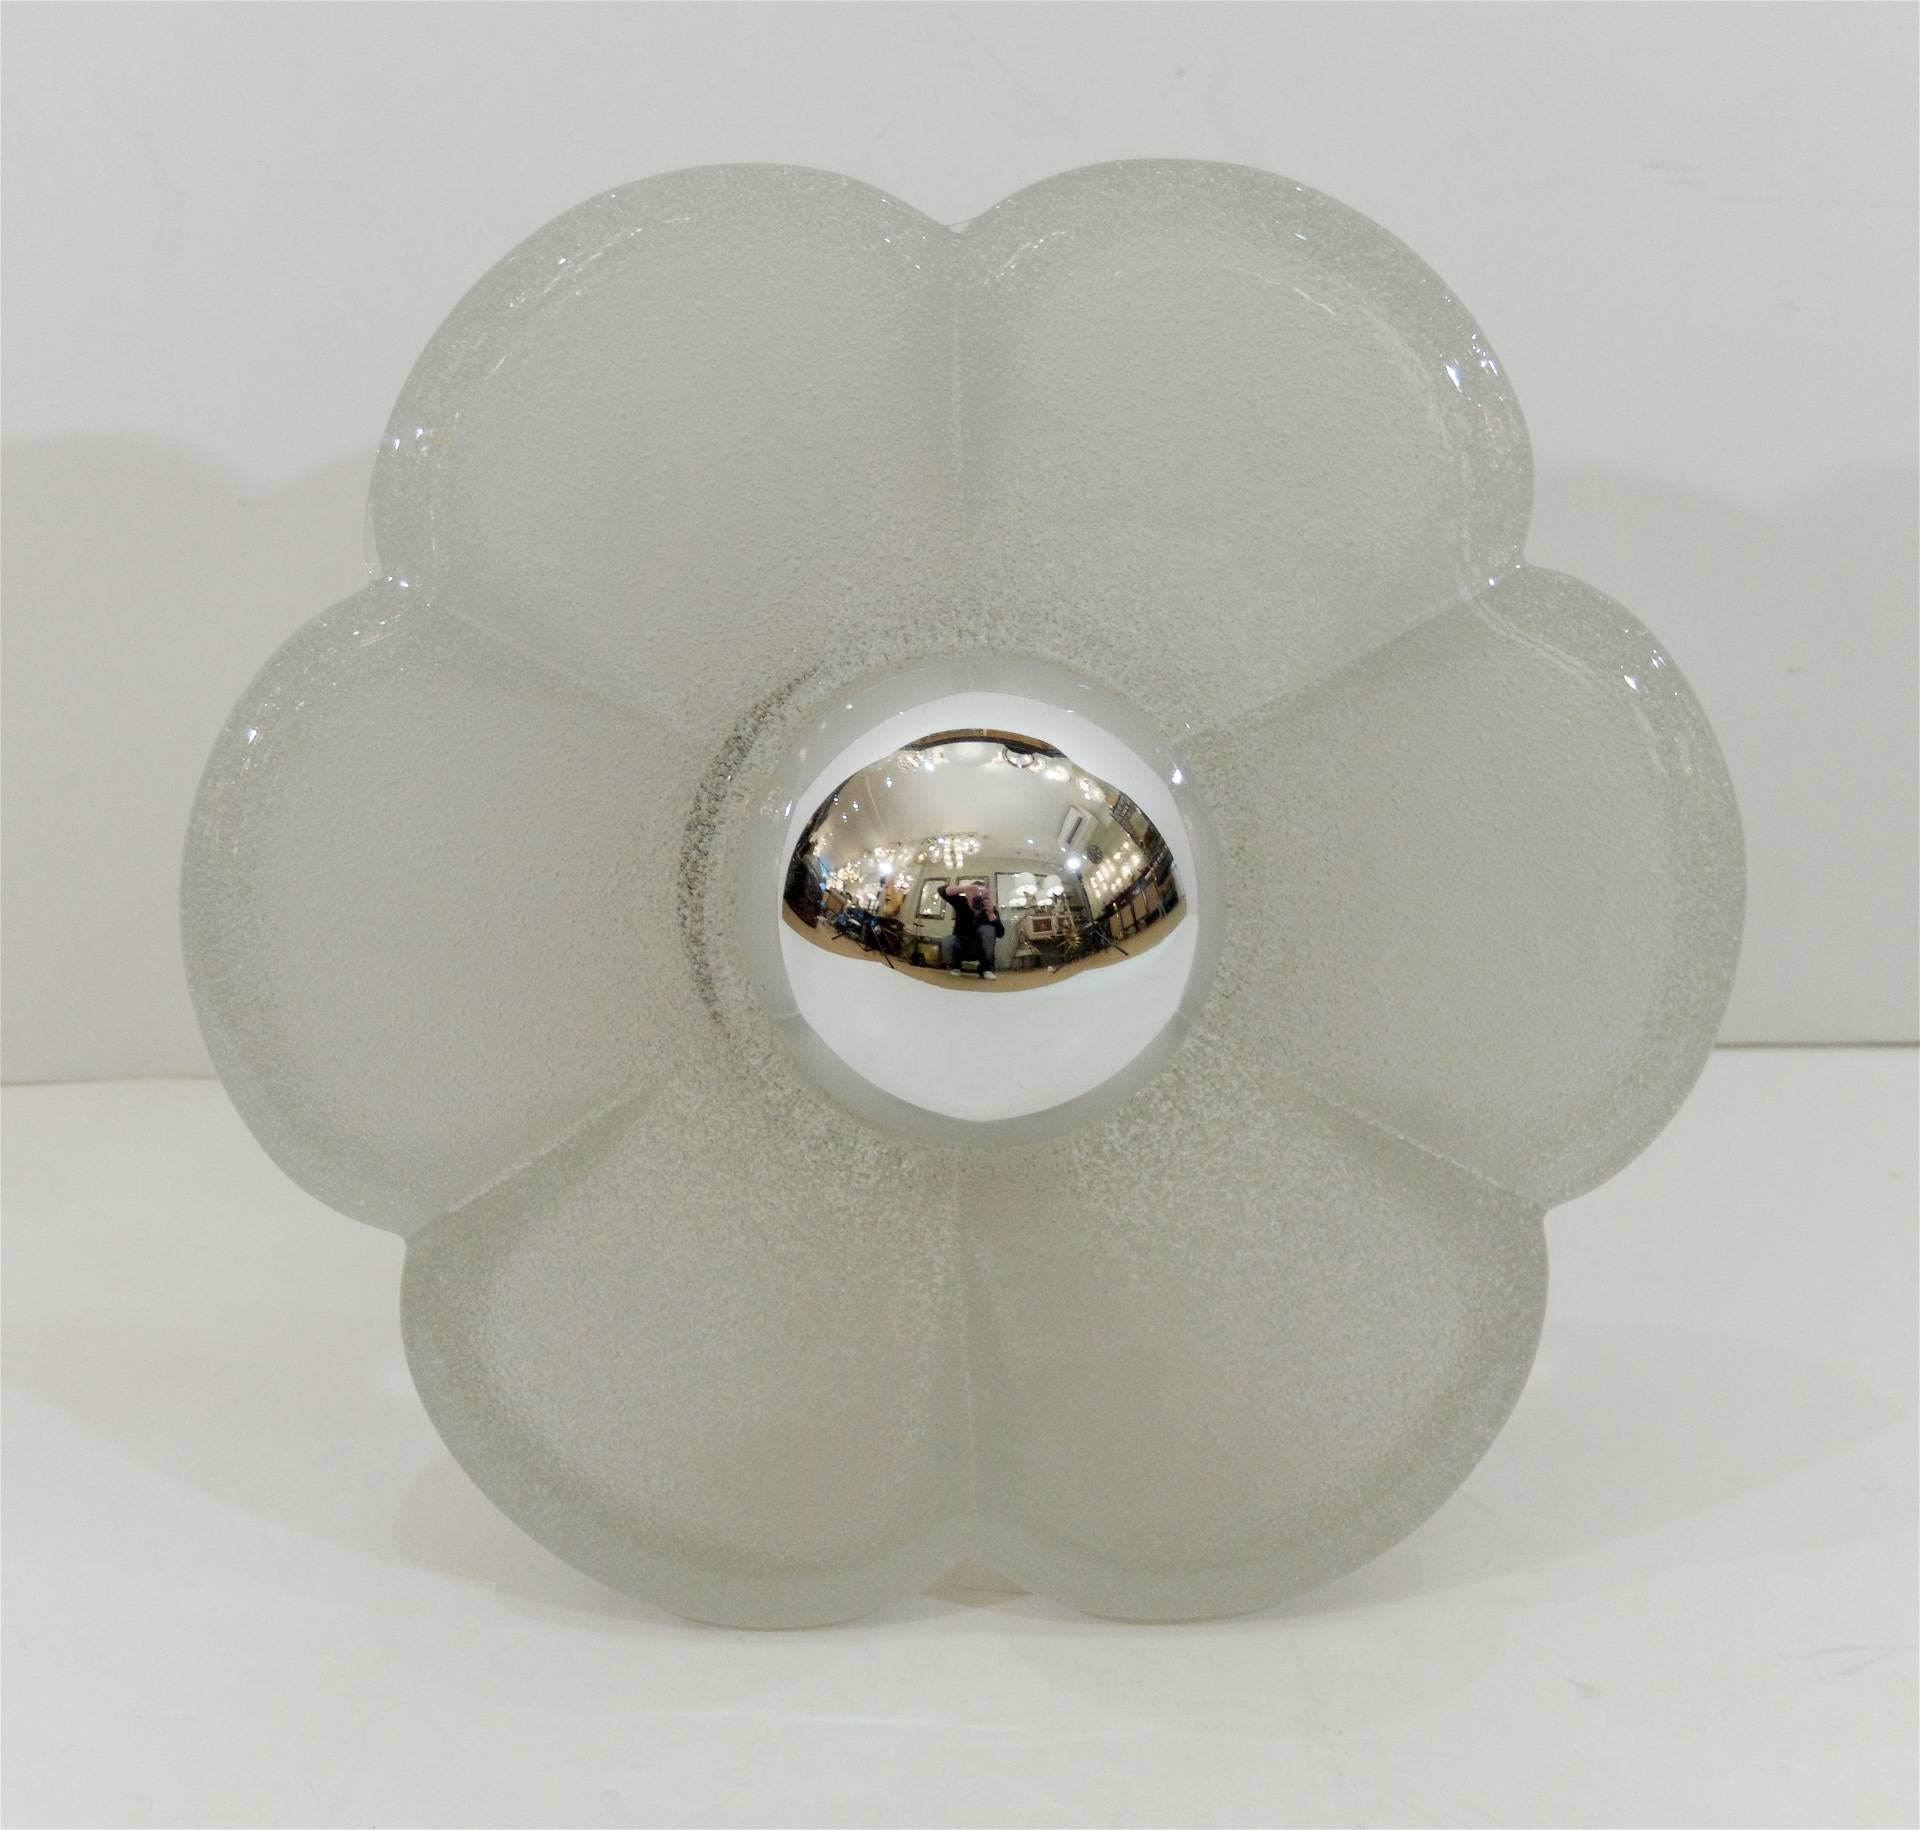 Substantial wall sconces in the form of a flower, the heavy solid glass diffuser mounted on a brass backplate. Designed for an exposed center bulb, shown with half-chrome globe bulb (not included). Uncertain manufacturer, possibly